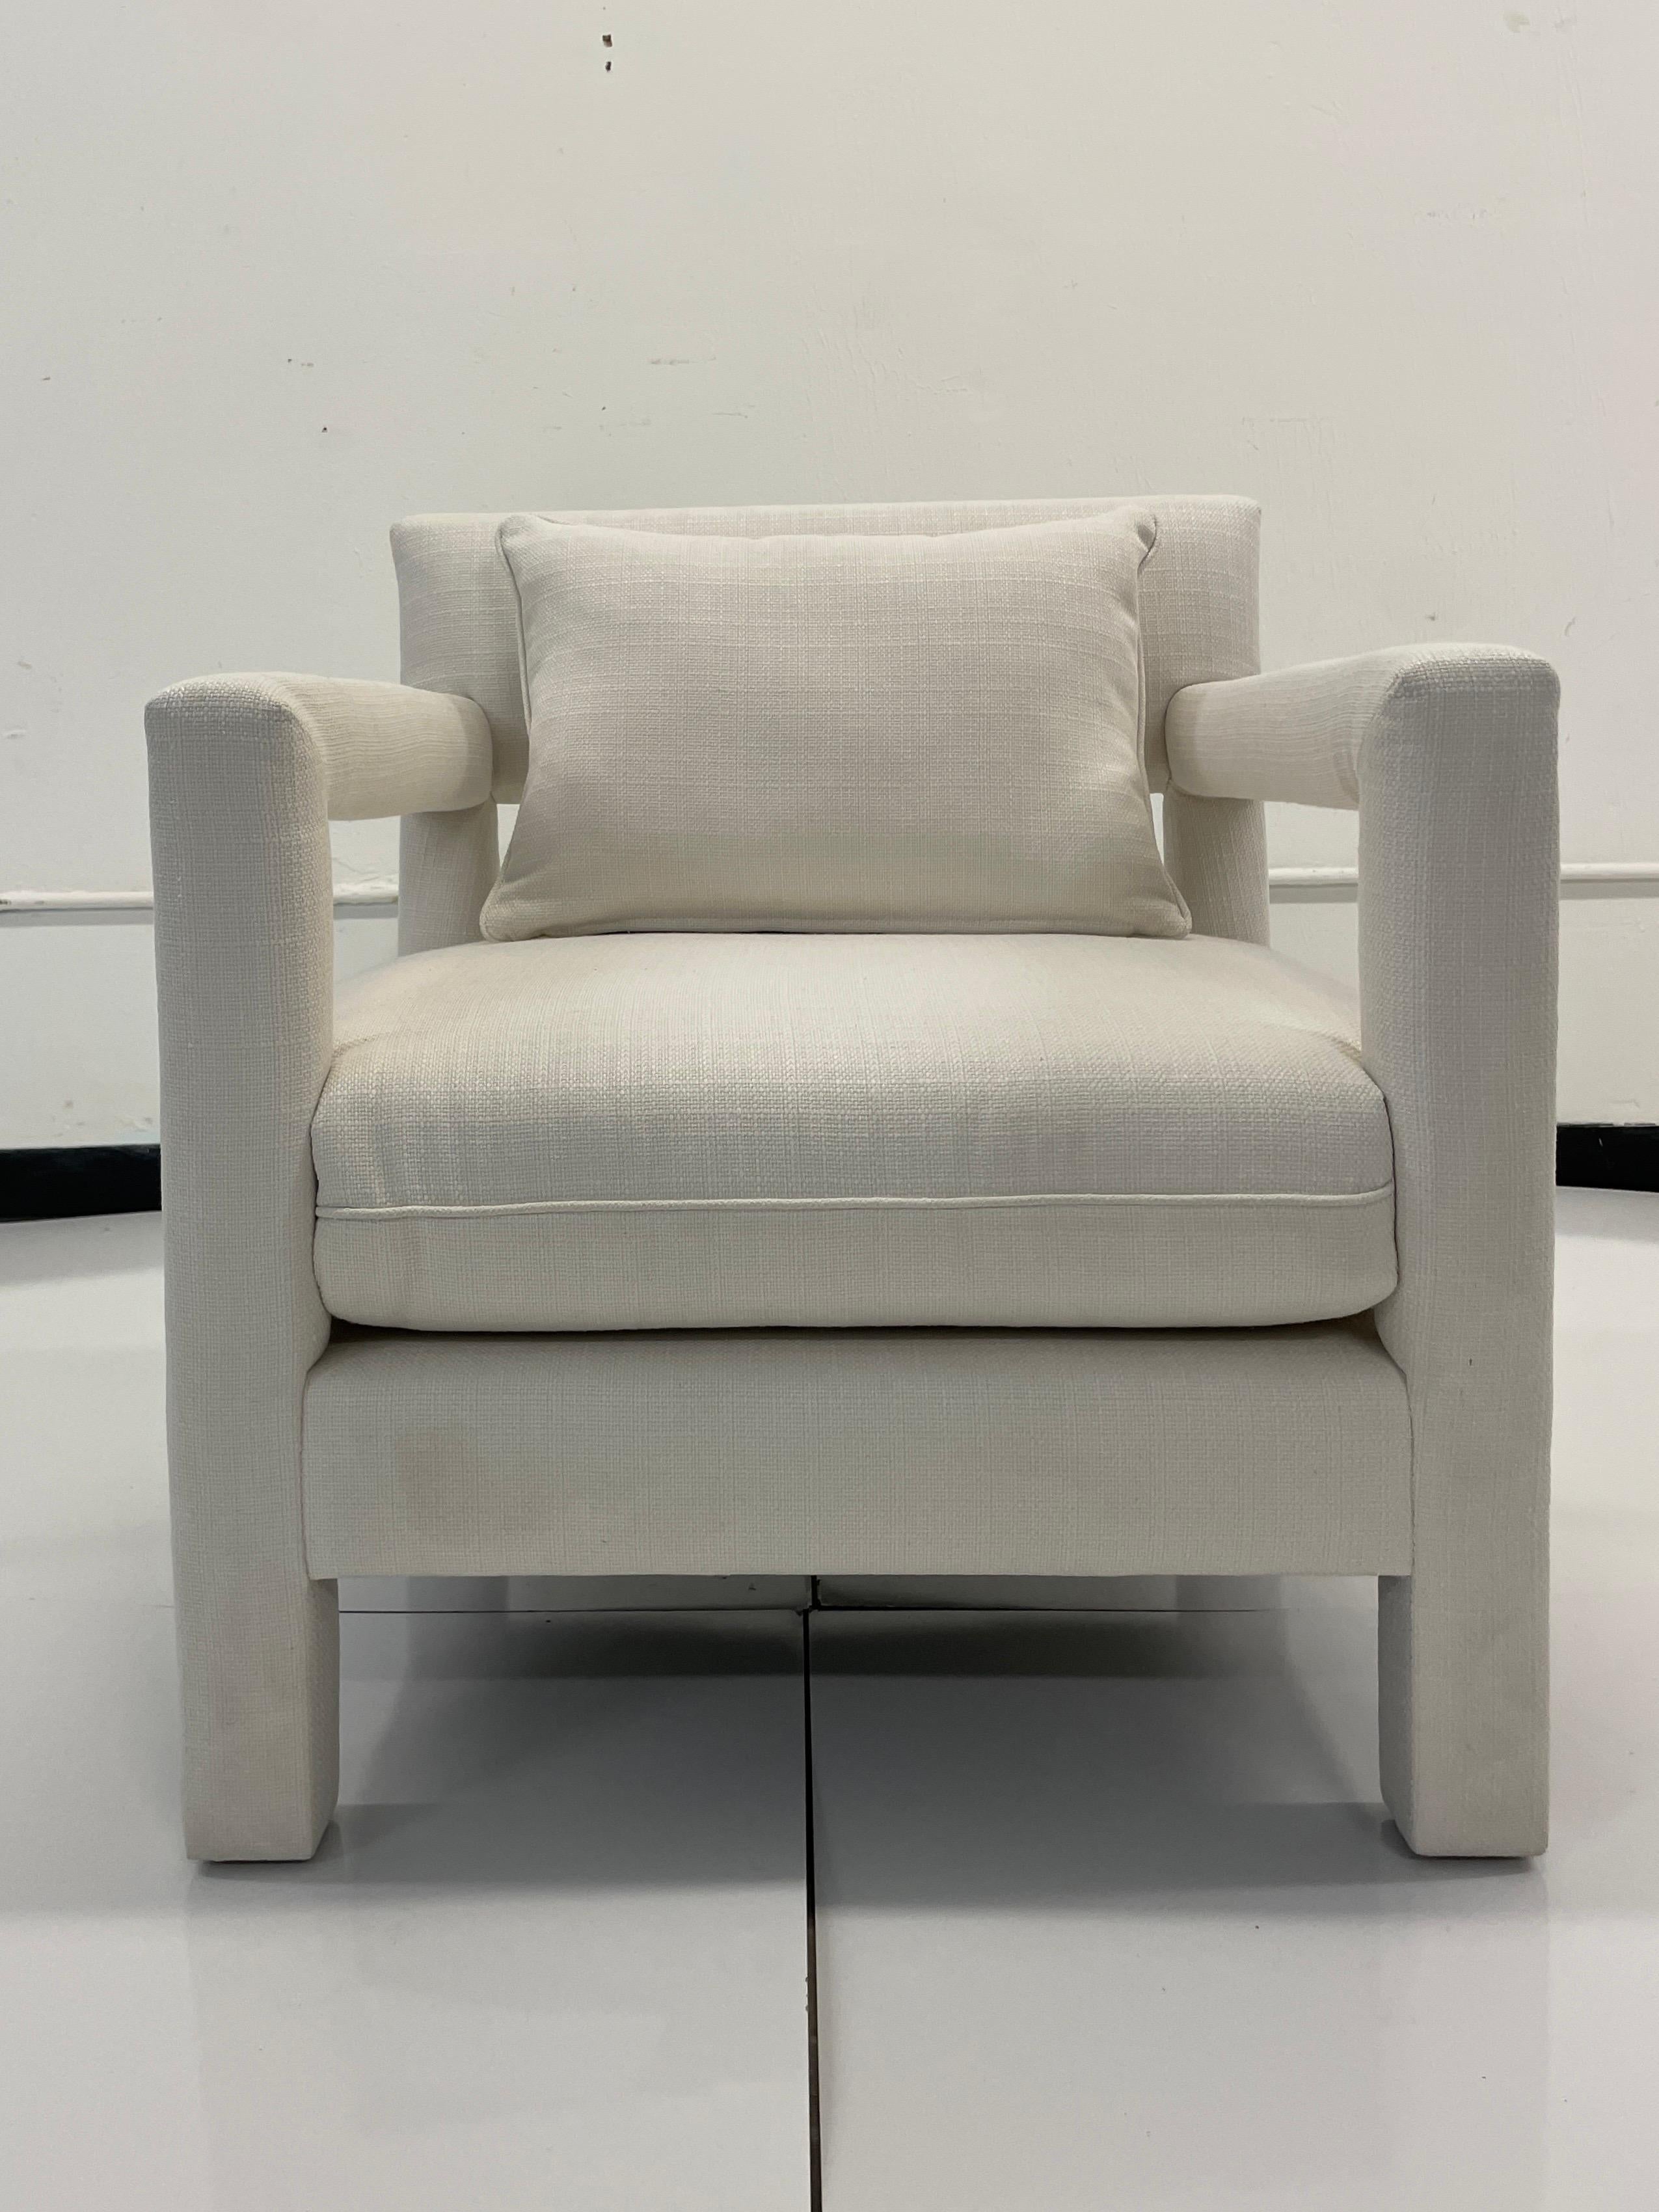 Classic Modern Details with fabulous tailoring designed by Todd Hase. Add some Modern Elements to your Living Space. This Classic Club Chair will work well with many styles of interiors and is upholstered in Todd Hase Textiles High Performance Off